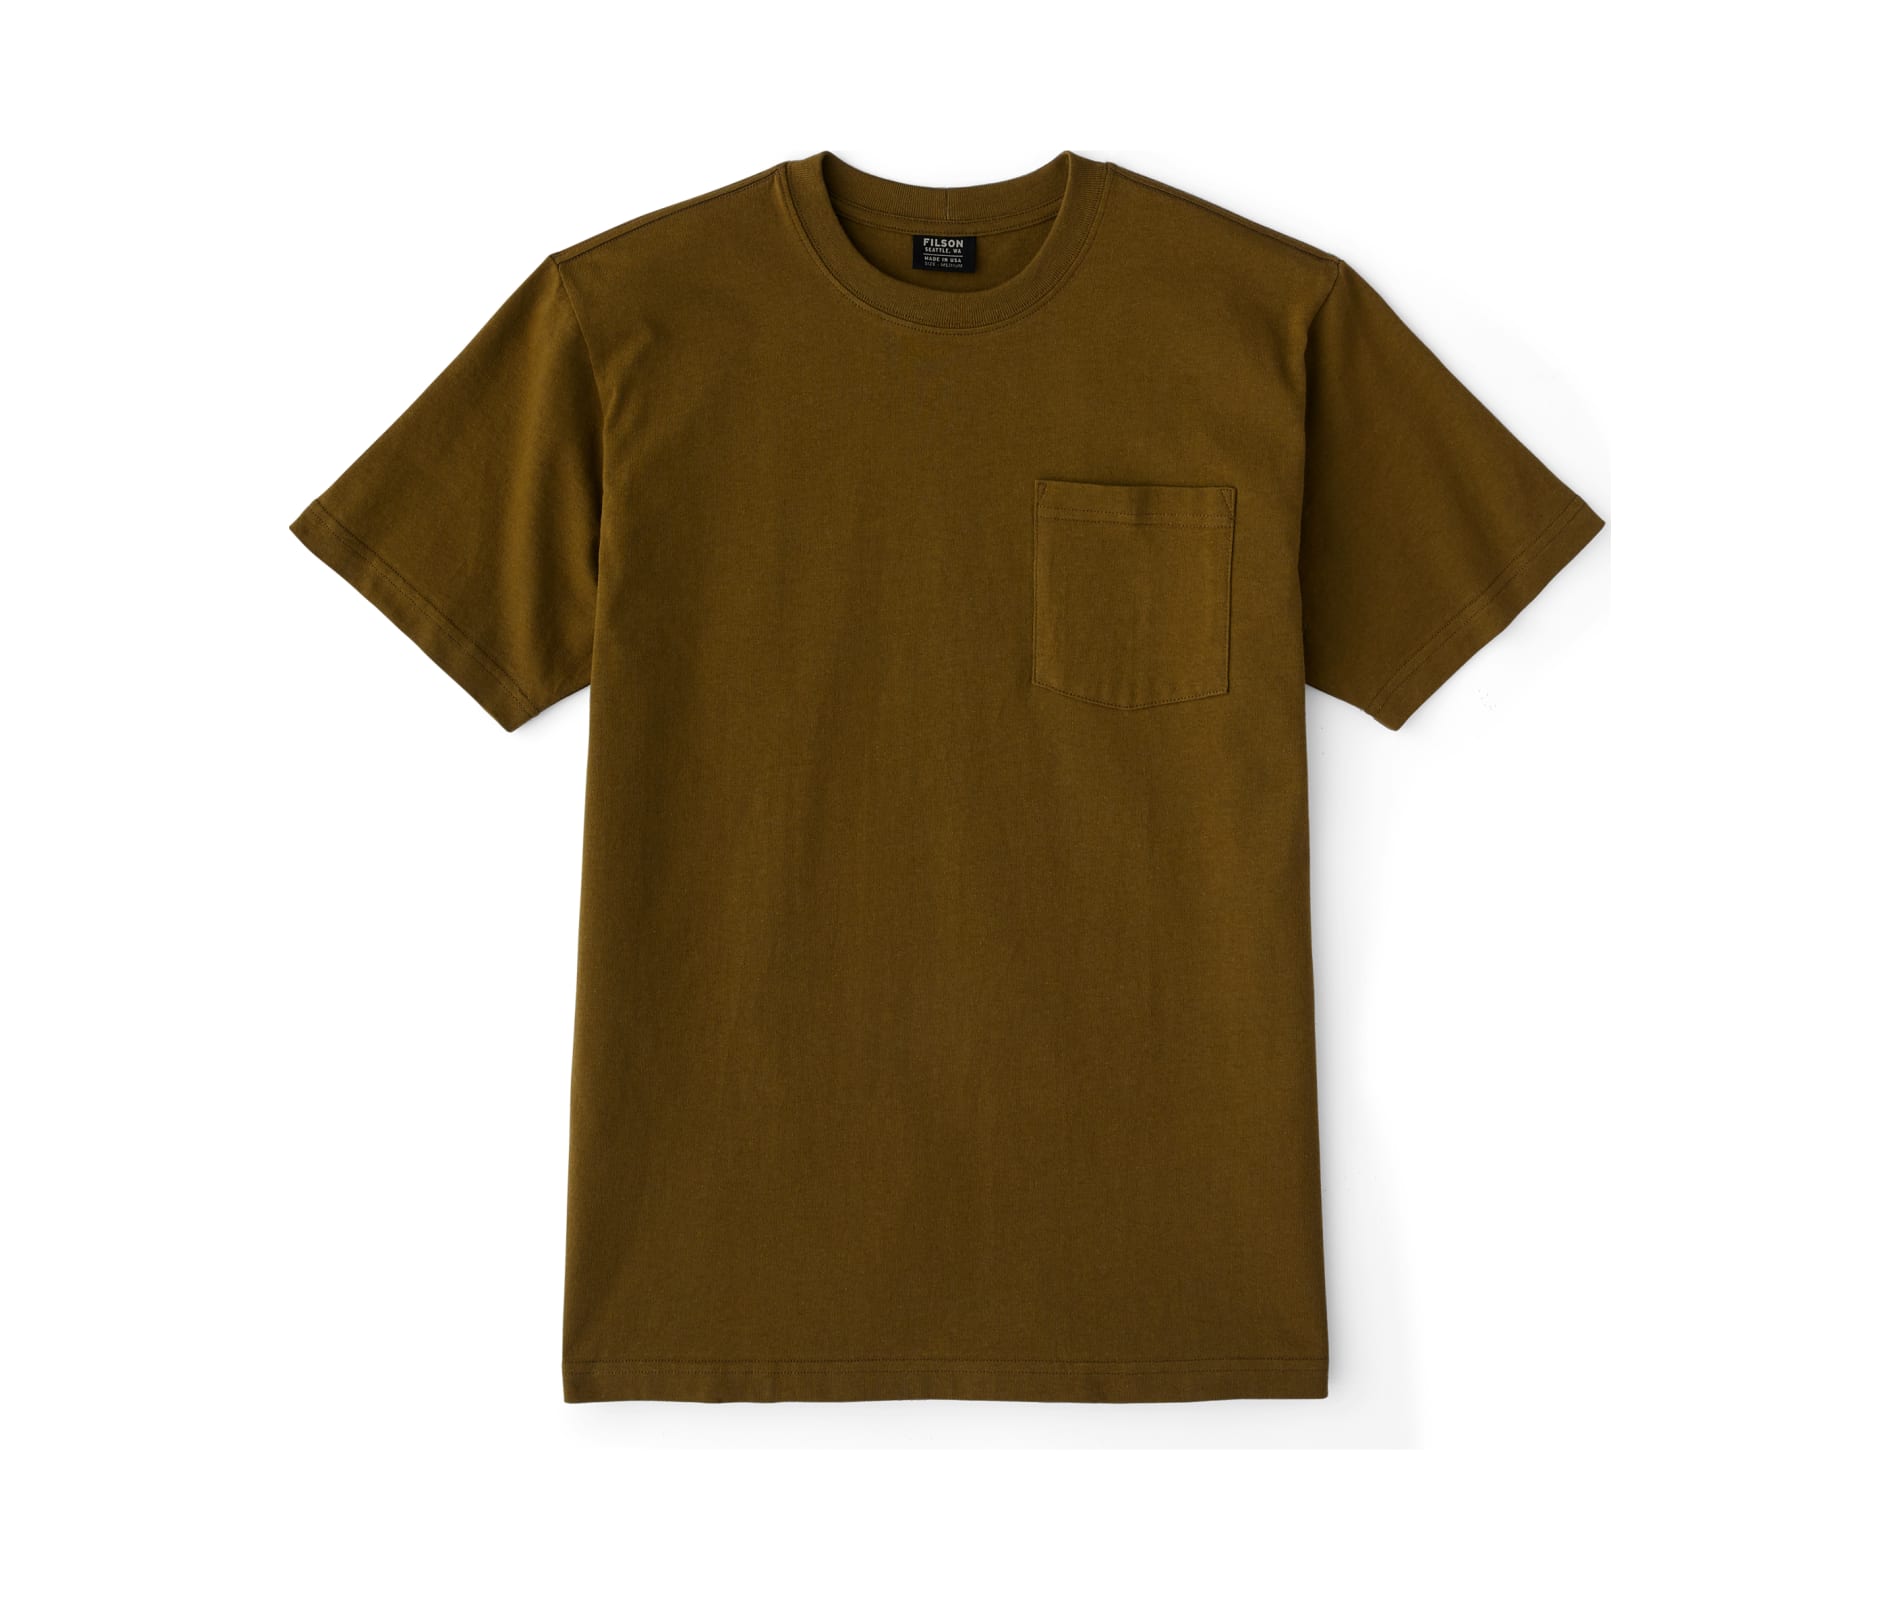 Filson Men's S/s Outfitter Solid One Pocket T-shirt - Olive Drab - Medium